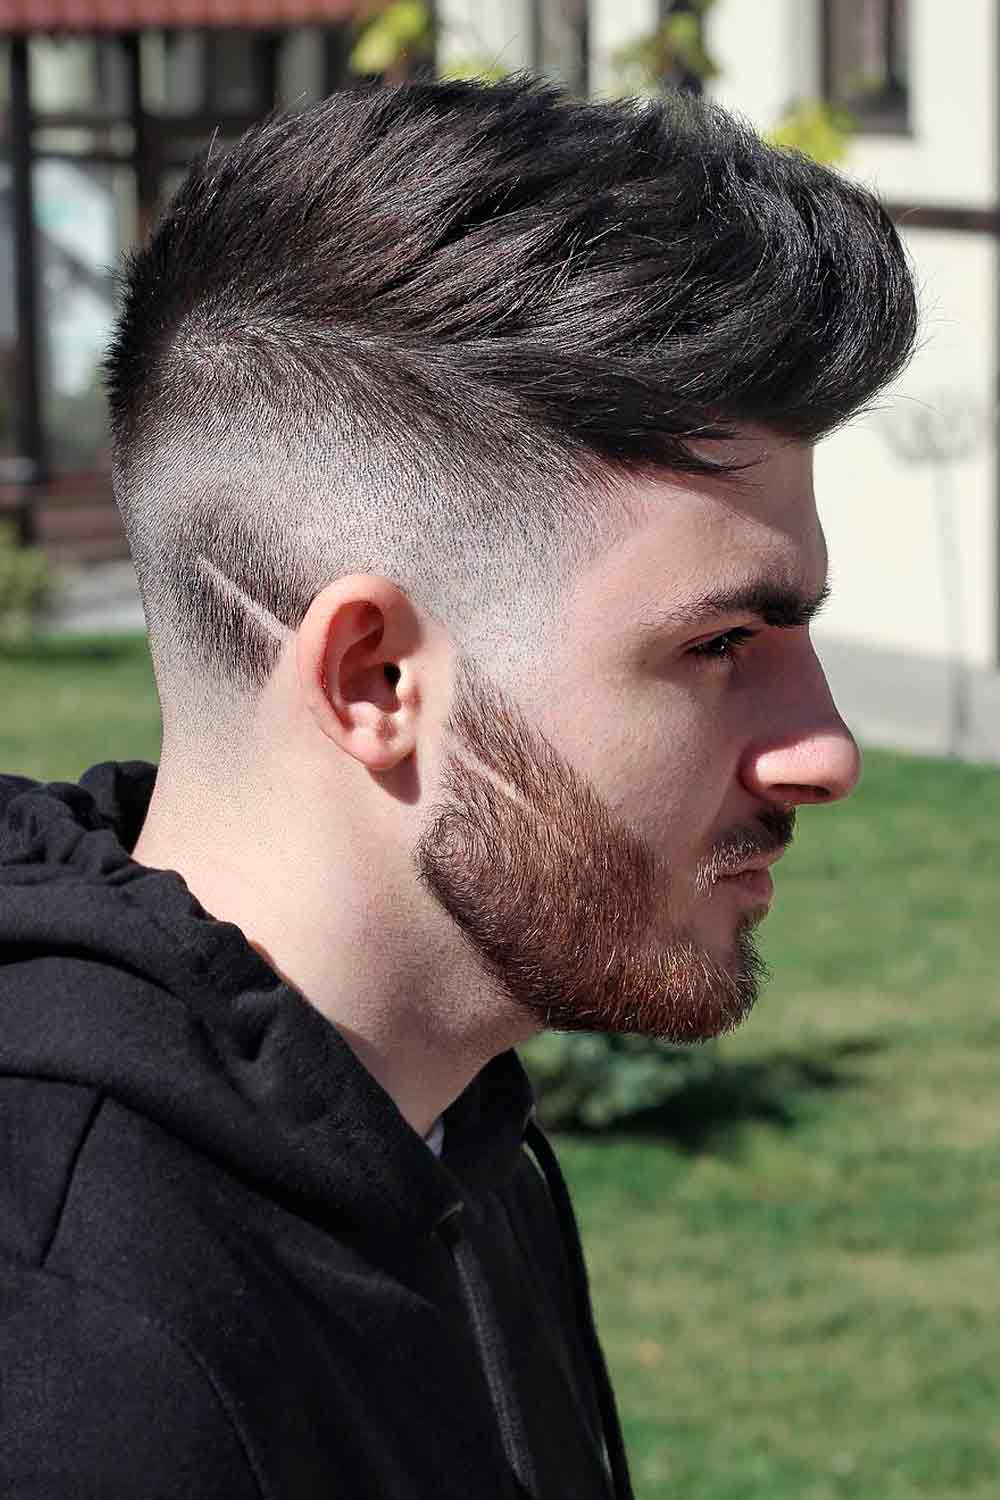 50 Best Short Haircuts, Hairstyles, Fades & Cuts For Men